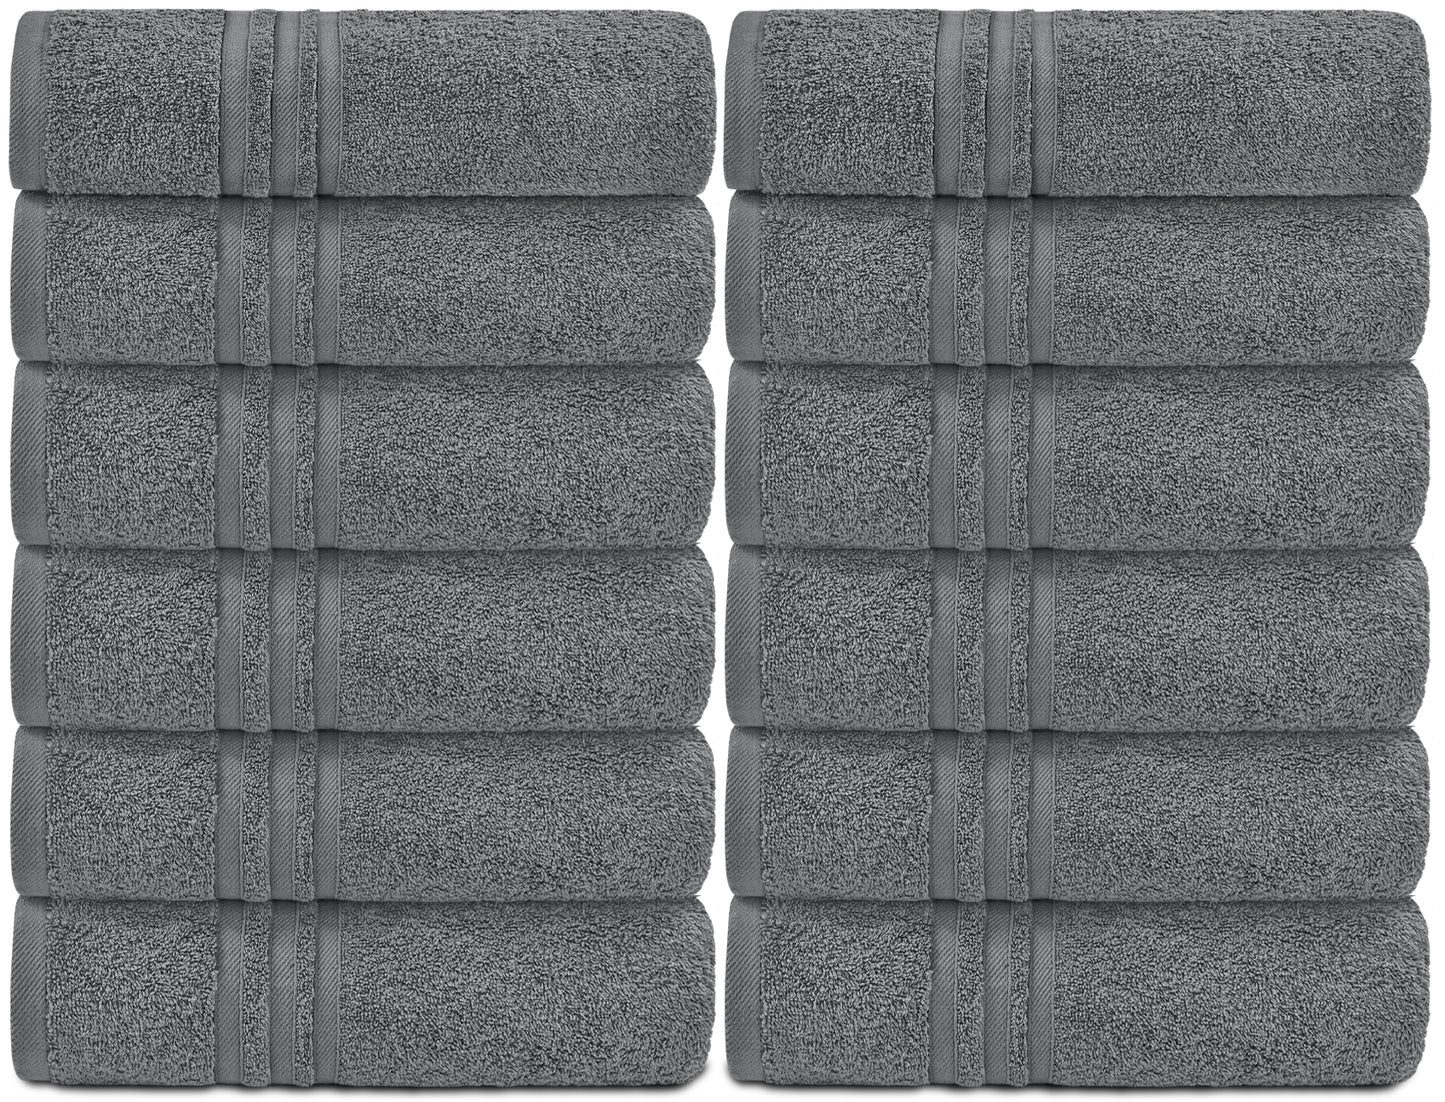 Wealuxe Home Collection Hand Towels | 16x27 | 12 Pack